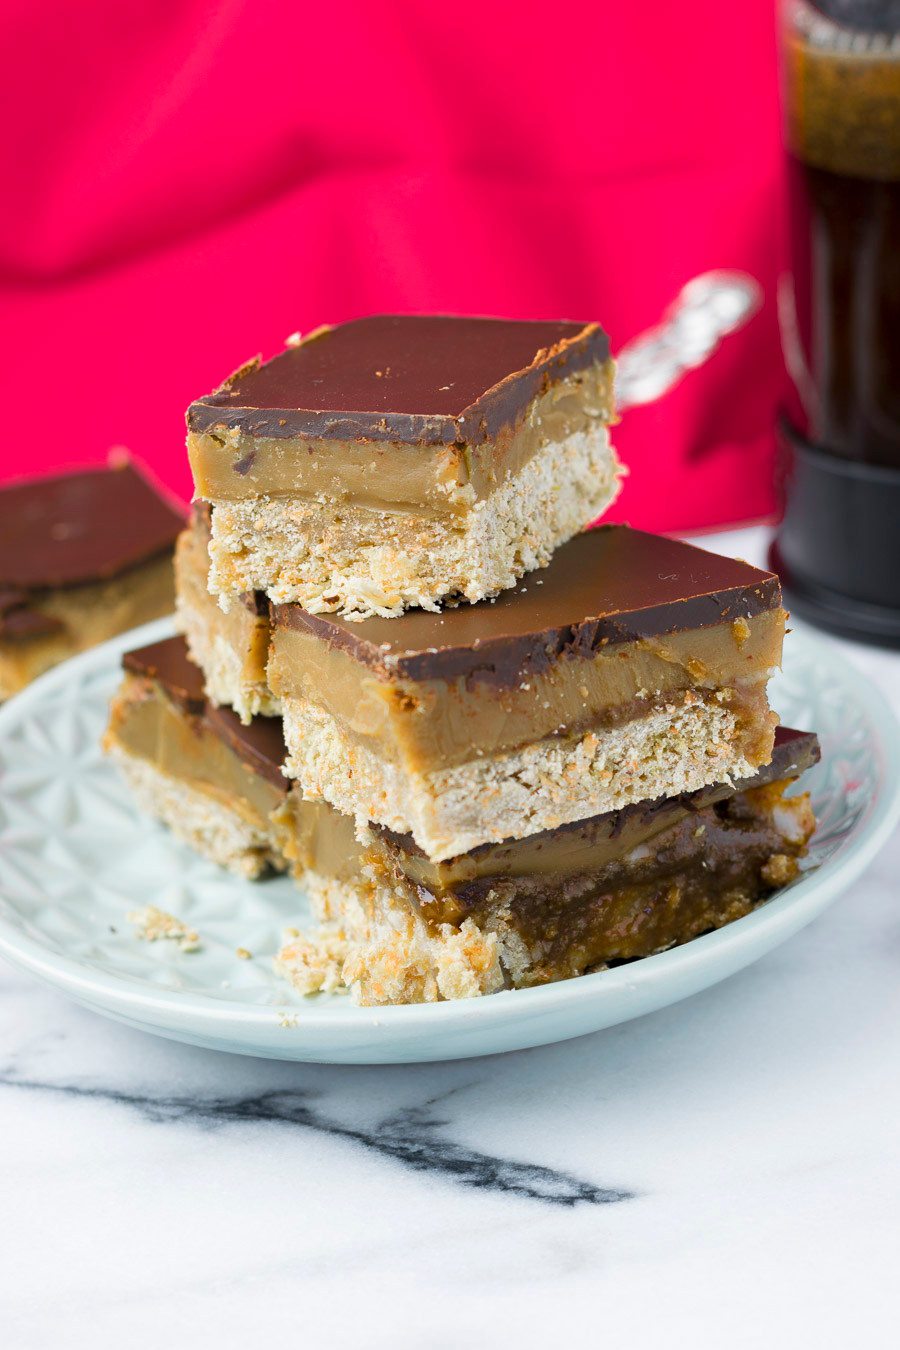 A stack of several pieces of the Vegan Caramel Shortbread on a light blue plate.